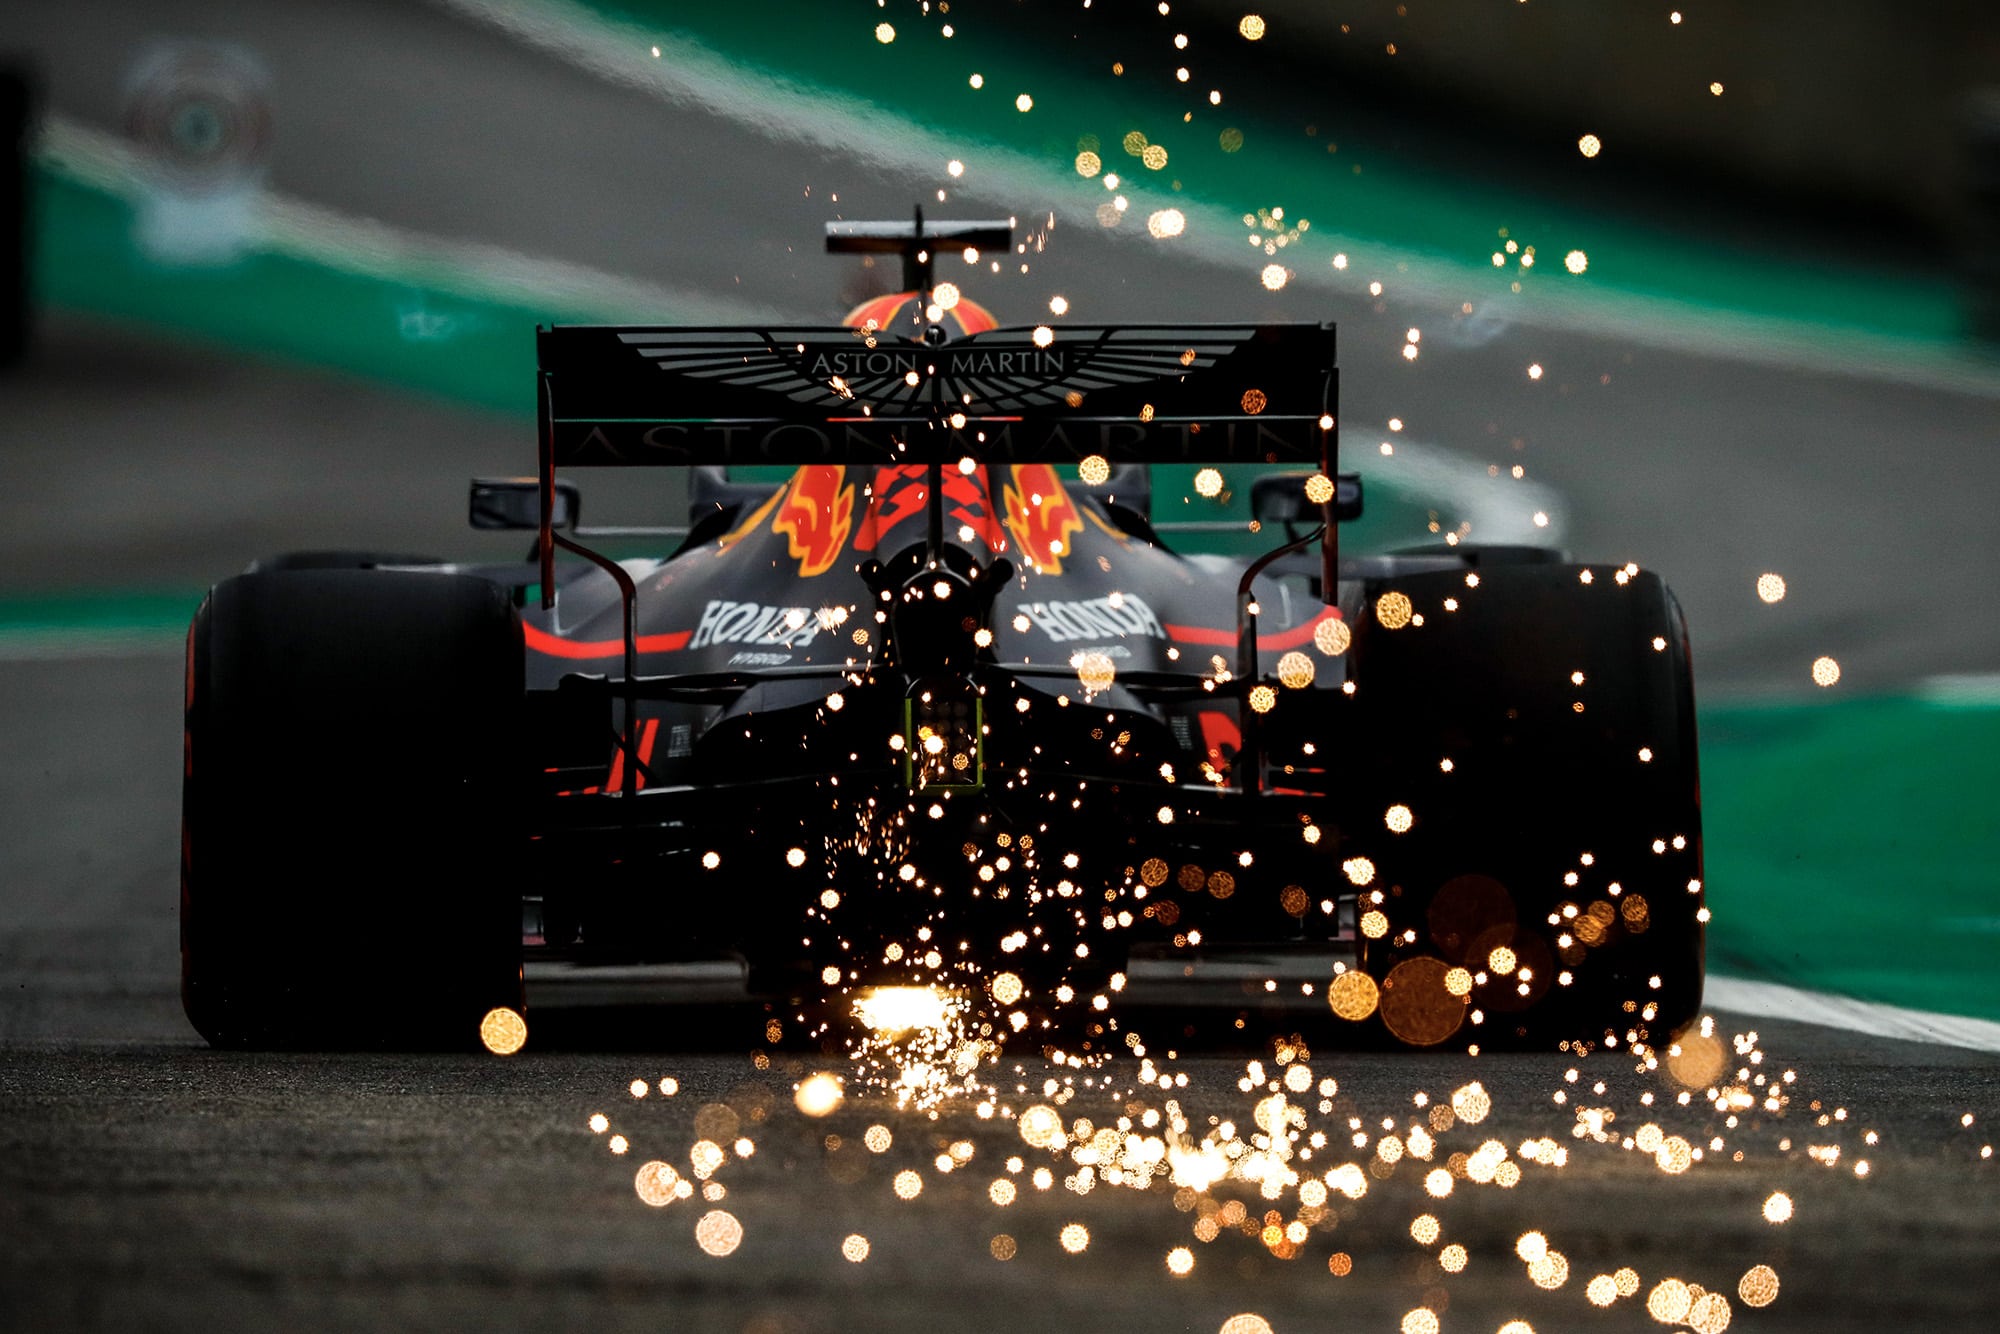 Max Verstappen leaves a trail of sparks during qualifying for the 2019 F1 Brazilian Grand Prix